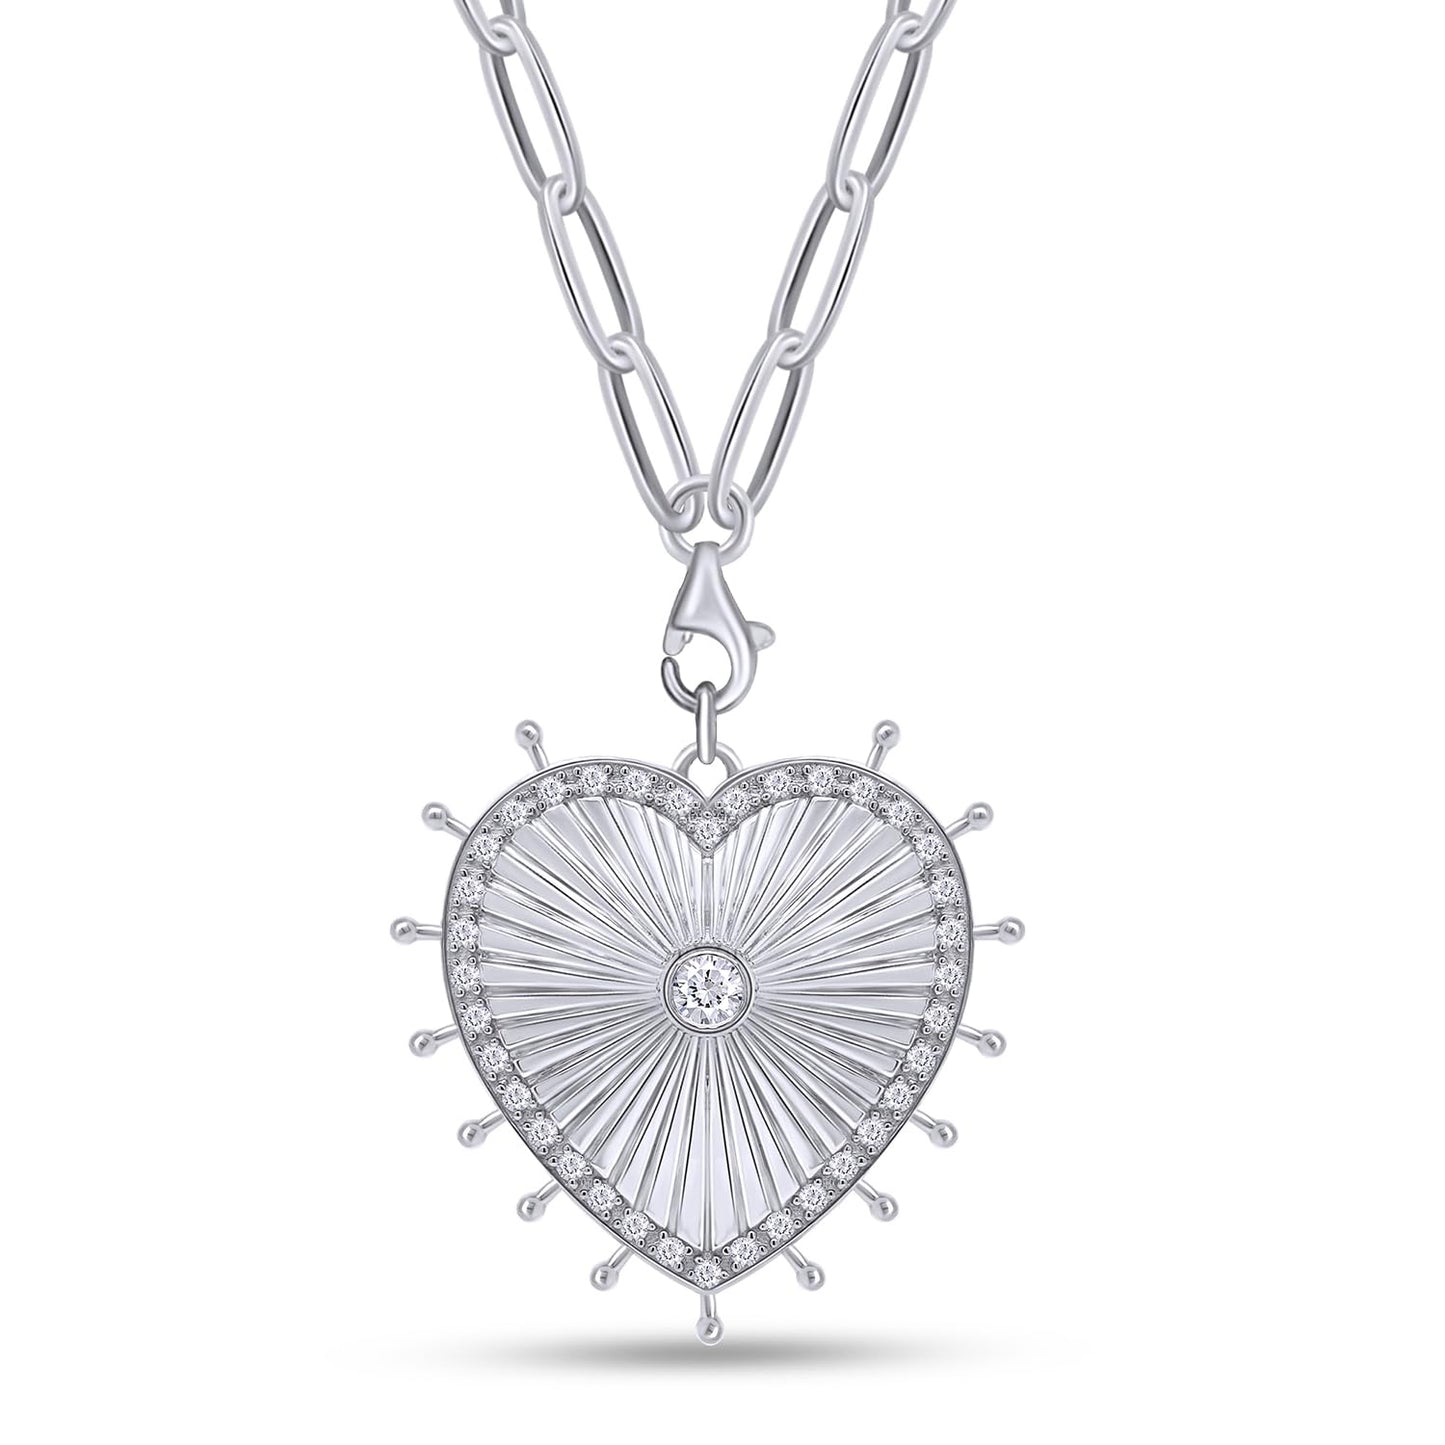 Chakra Medallion Victorian Heart Pendant Necklace Round Lab Created Moissanite Diamond Vintage Style Necklaces For Women In 925 Sterling Silver Unique Statement Jewelry